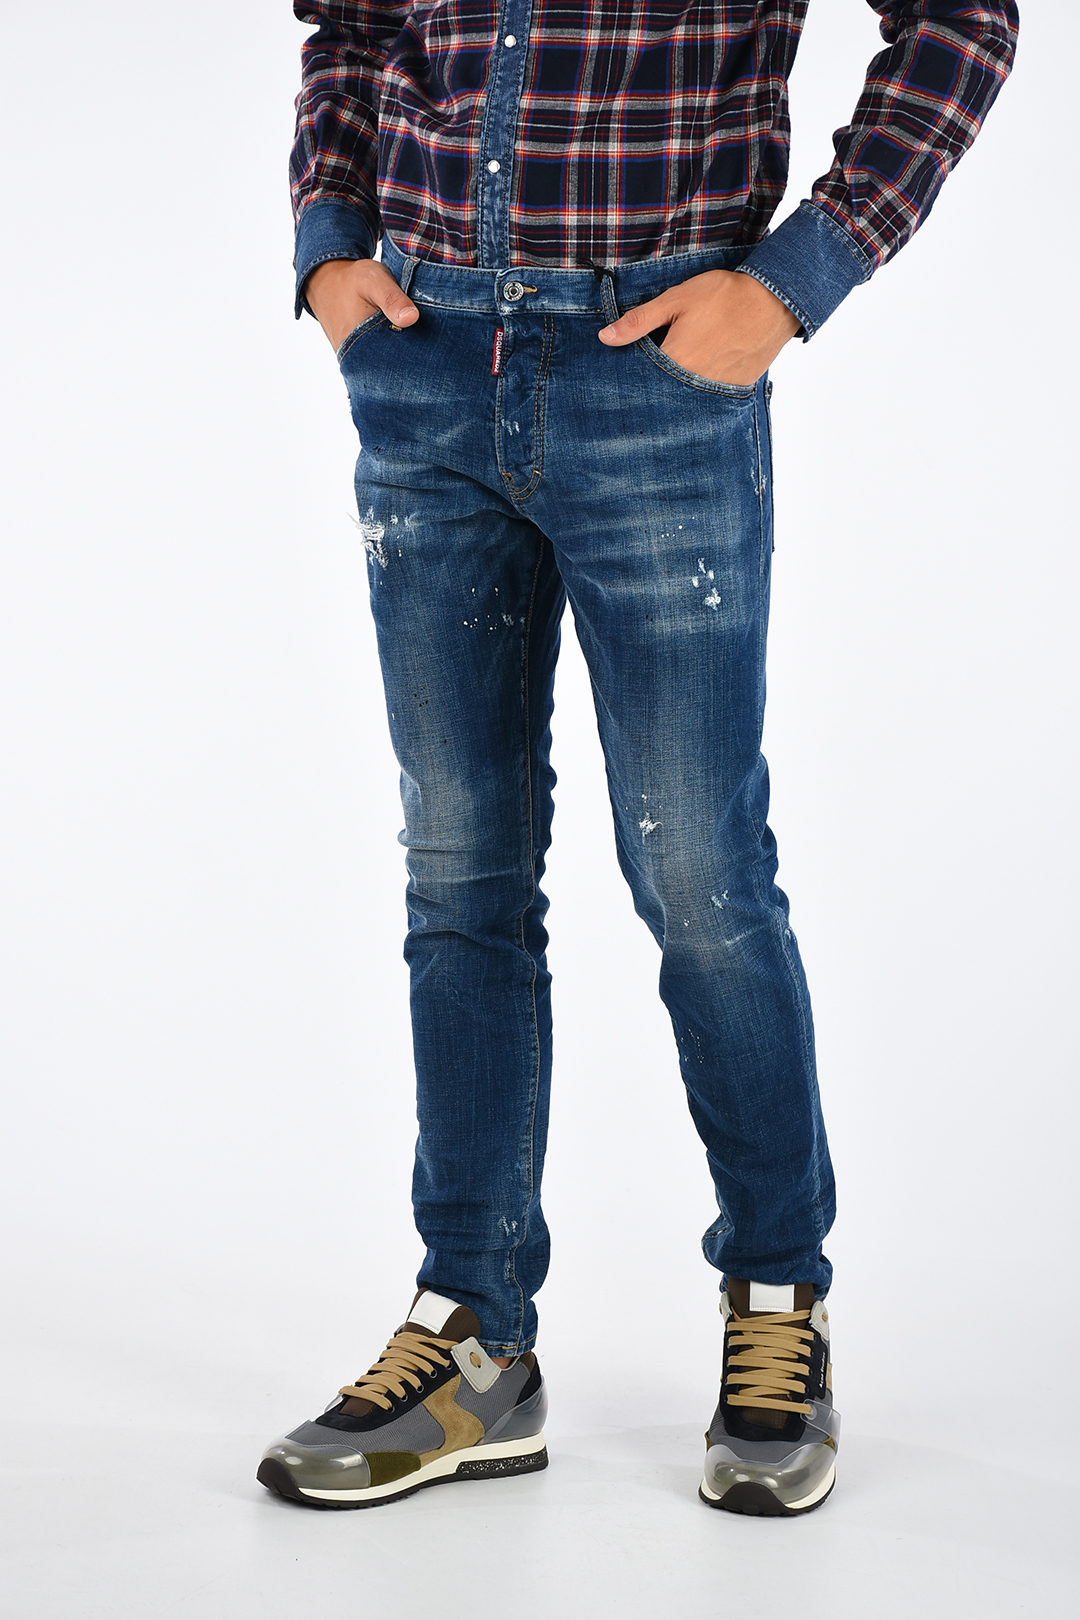 dsquared cool guy jeans fit